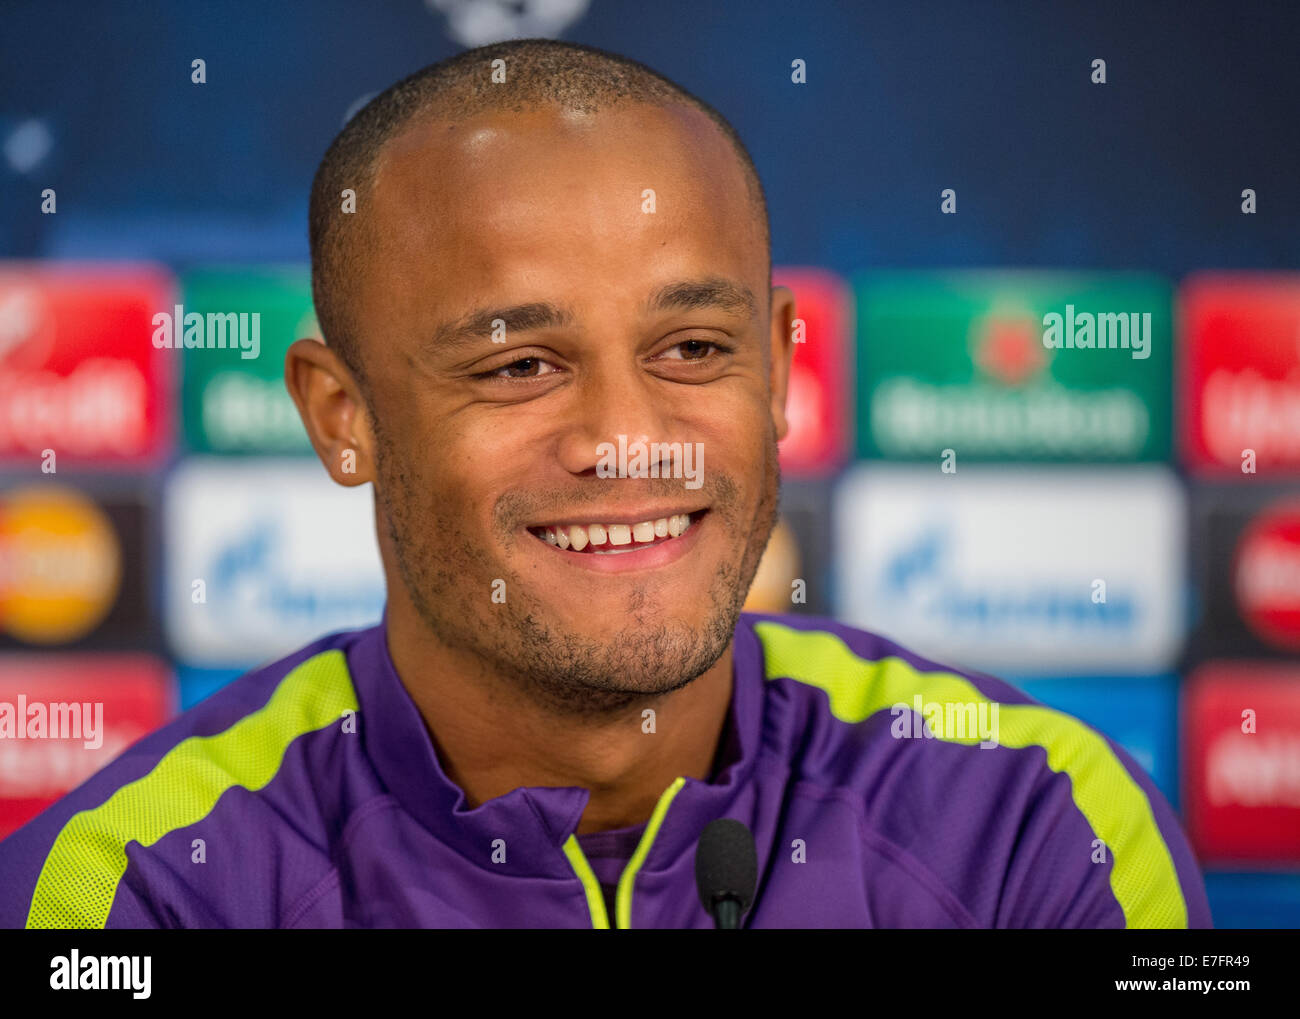 Munich, Germany. 16th Sep, 2014. Manchester's Vincent Kompany during a press conference in Munich, Germany, 16 September 2014. FC Bayern Munich will play Manchester City in the group phase of the UEFA Champions League on 17 September 2014. Photo: MARC MUELLER/dpa/Alamy Live News Stock Photo